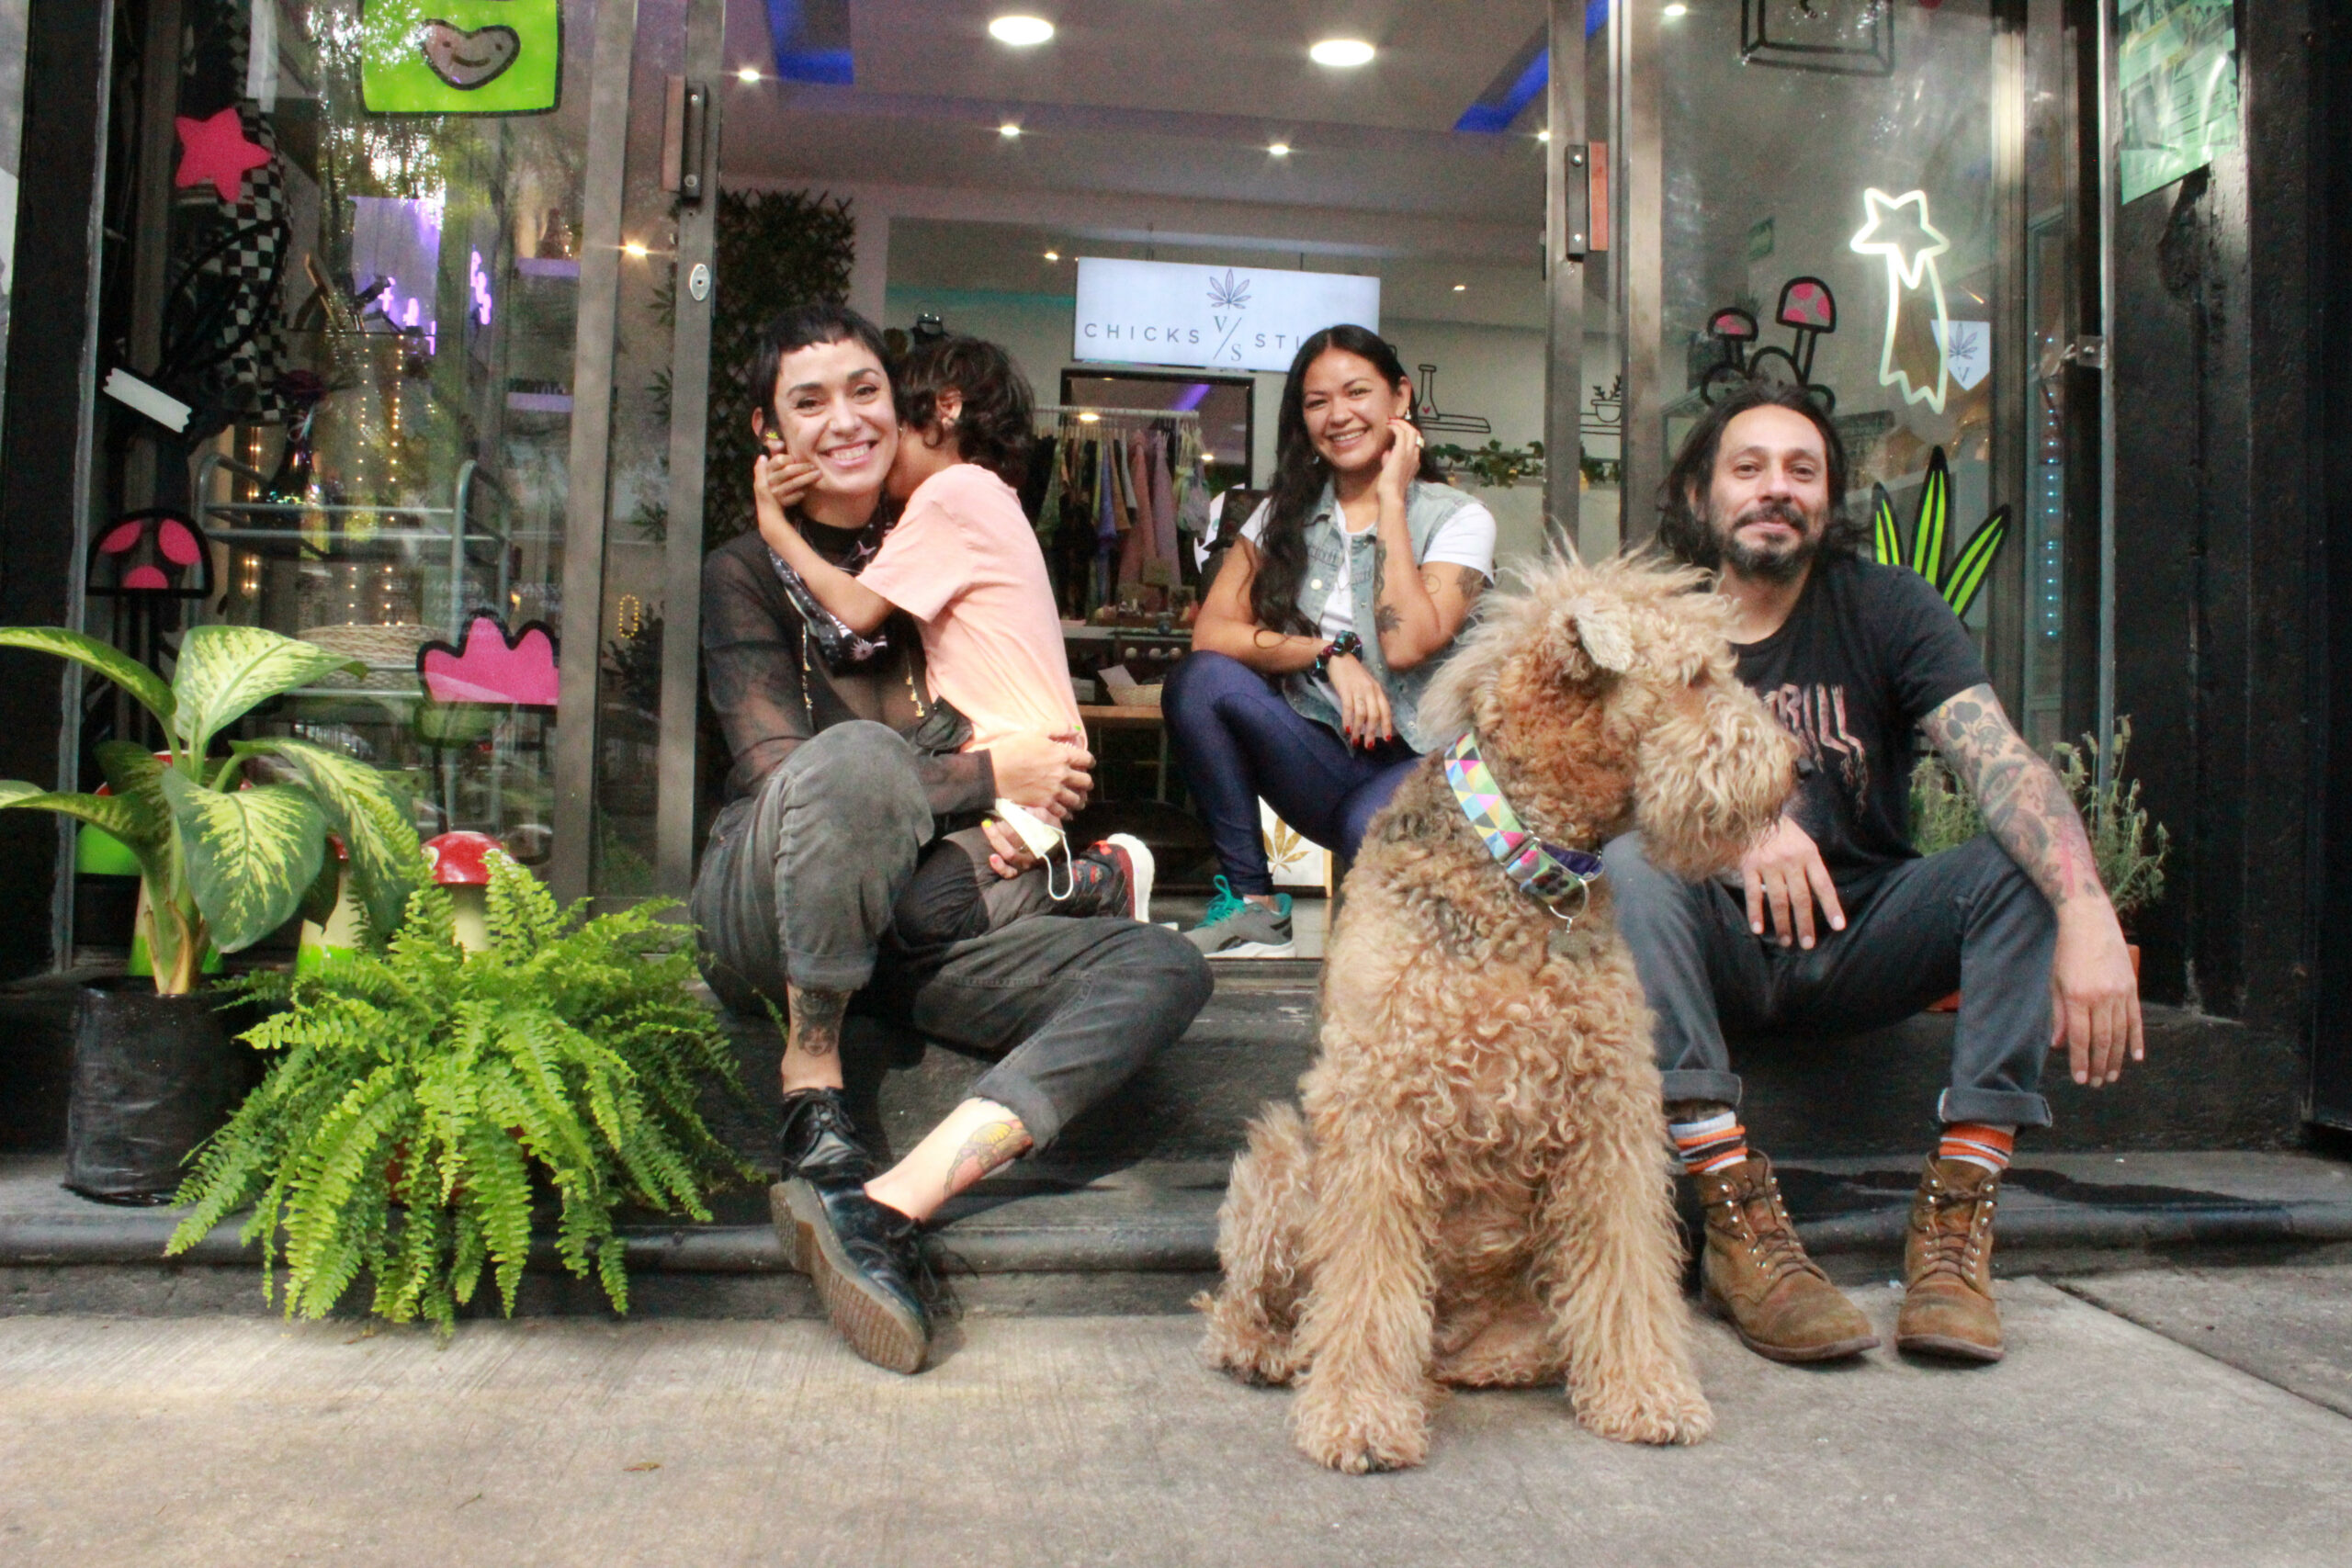 This Mexico City Smoke Shop Is a Hub for Local Women in Weed and Anti-Prohibitionist Meet-Ups